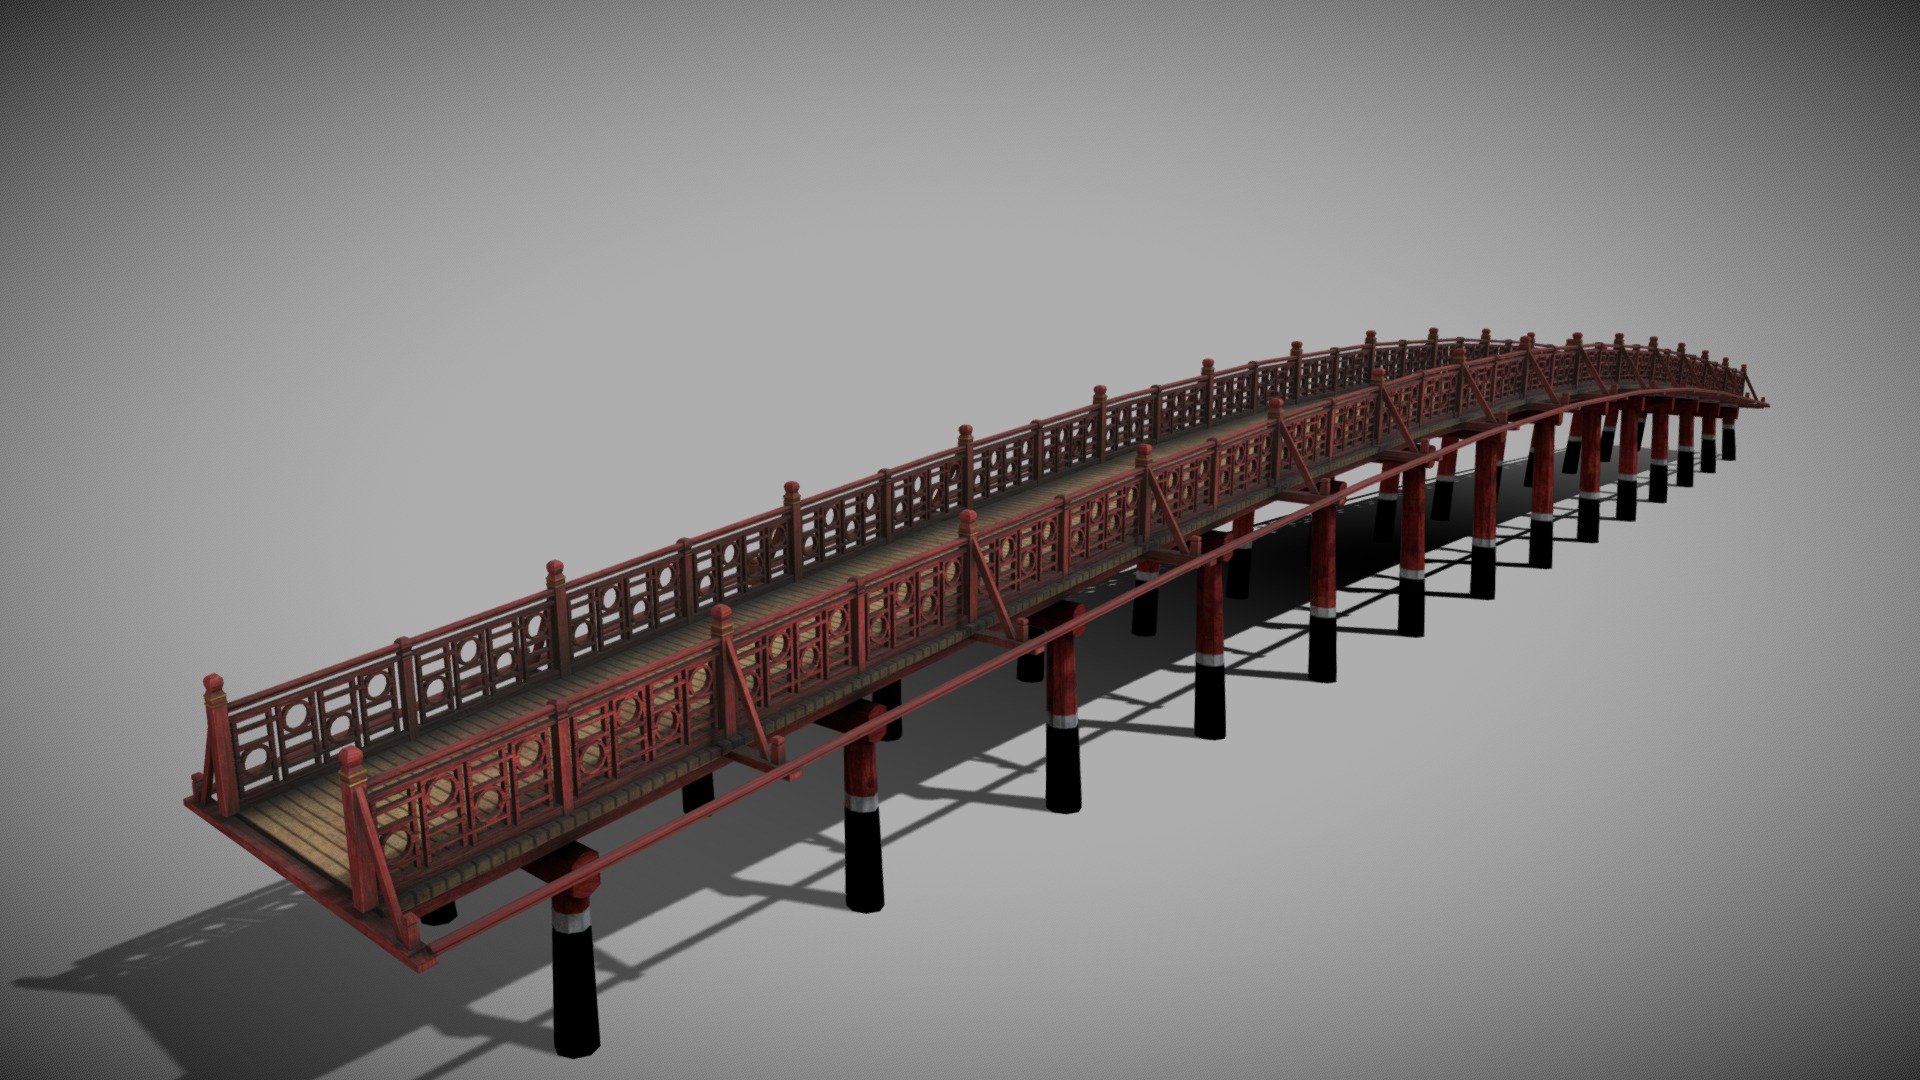 This bridge is based on a bridge in viena, (cầu thê húc). It is game ready.

-Low poly

-2K texture

-1 material

-7 UDIMs 

-No pluggins

-OBJ file

-Maps included: basecolor, height, normal, roughness, metallic 3d model